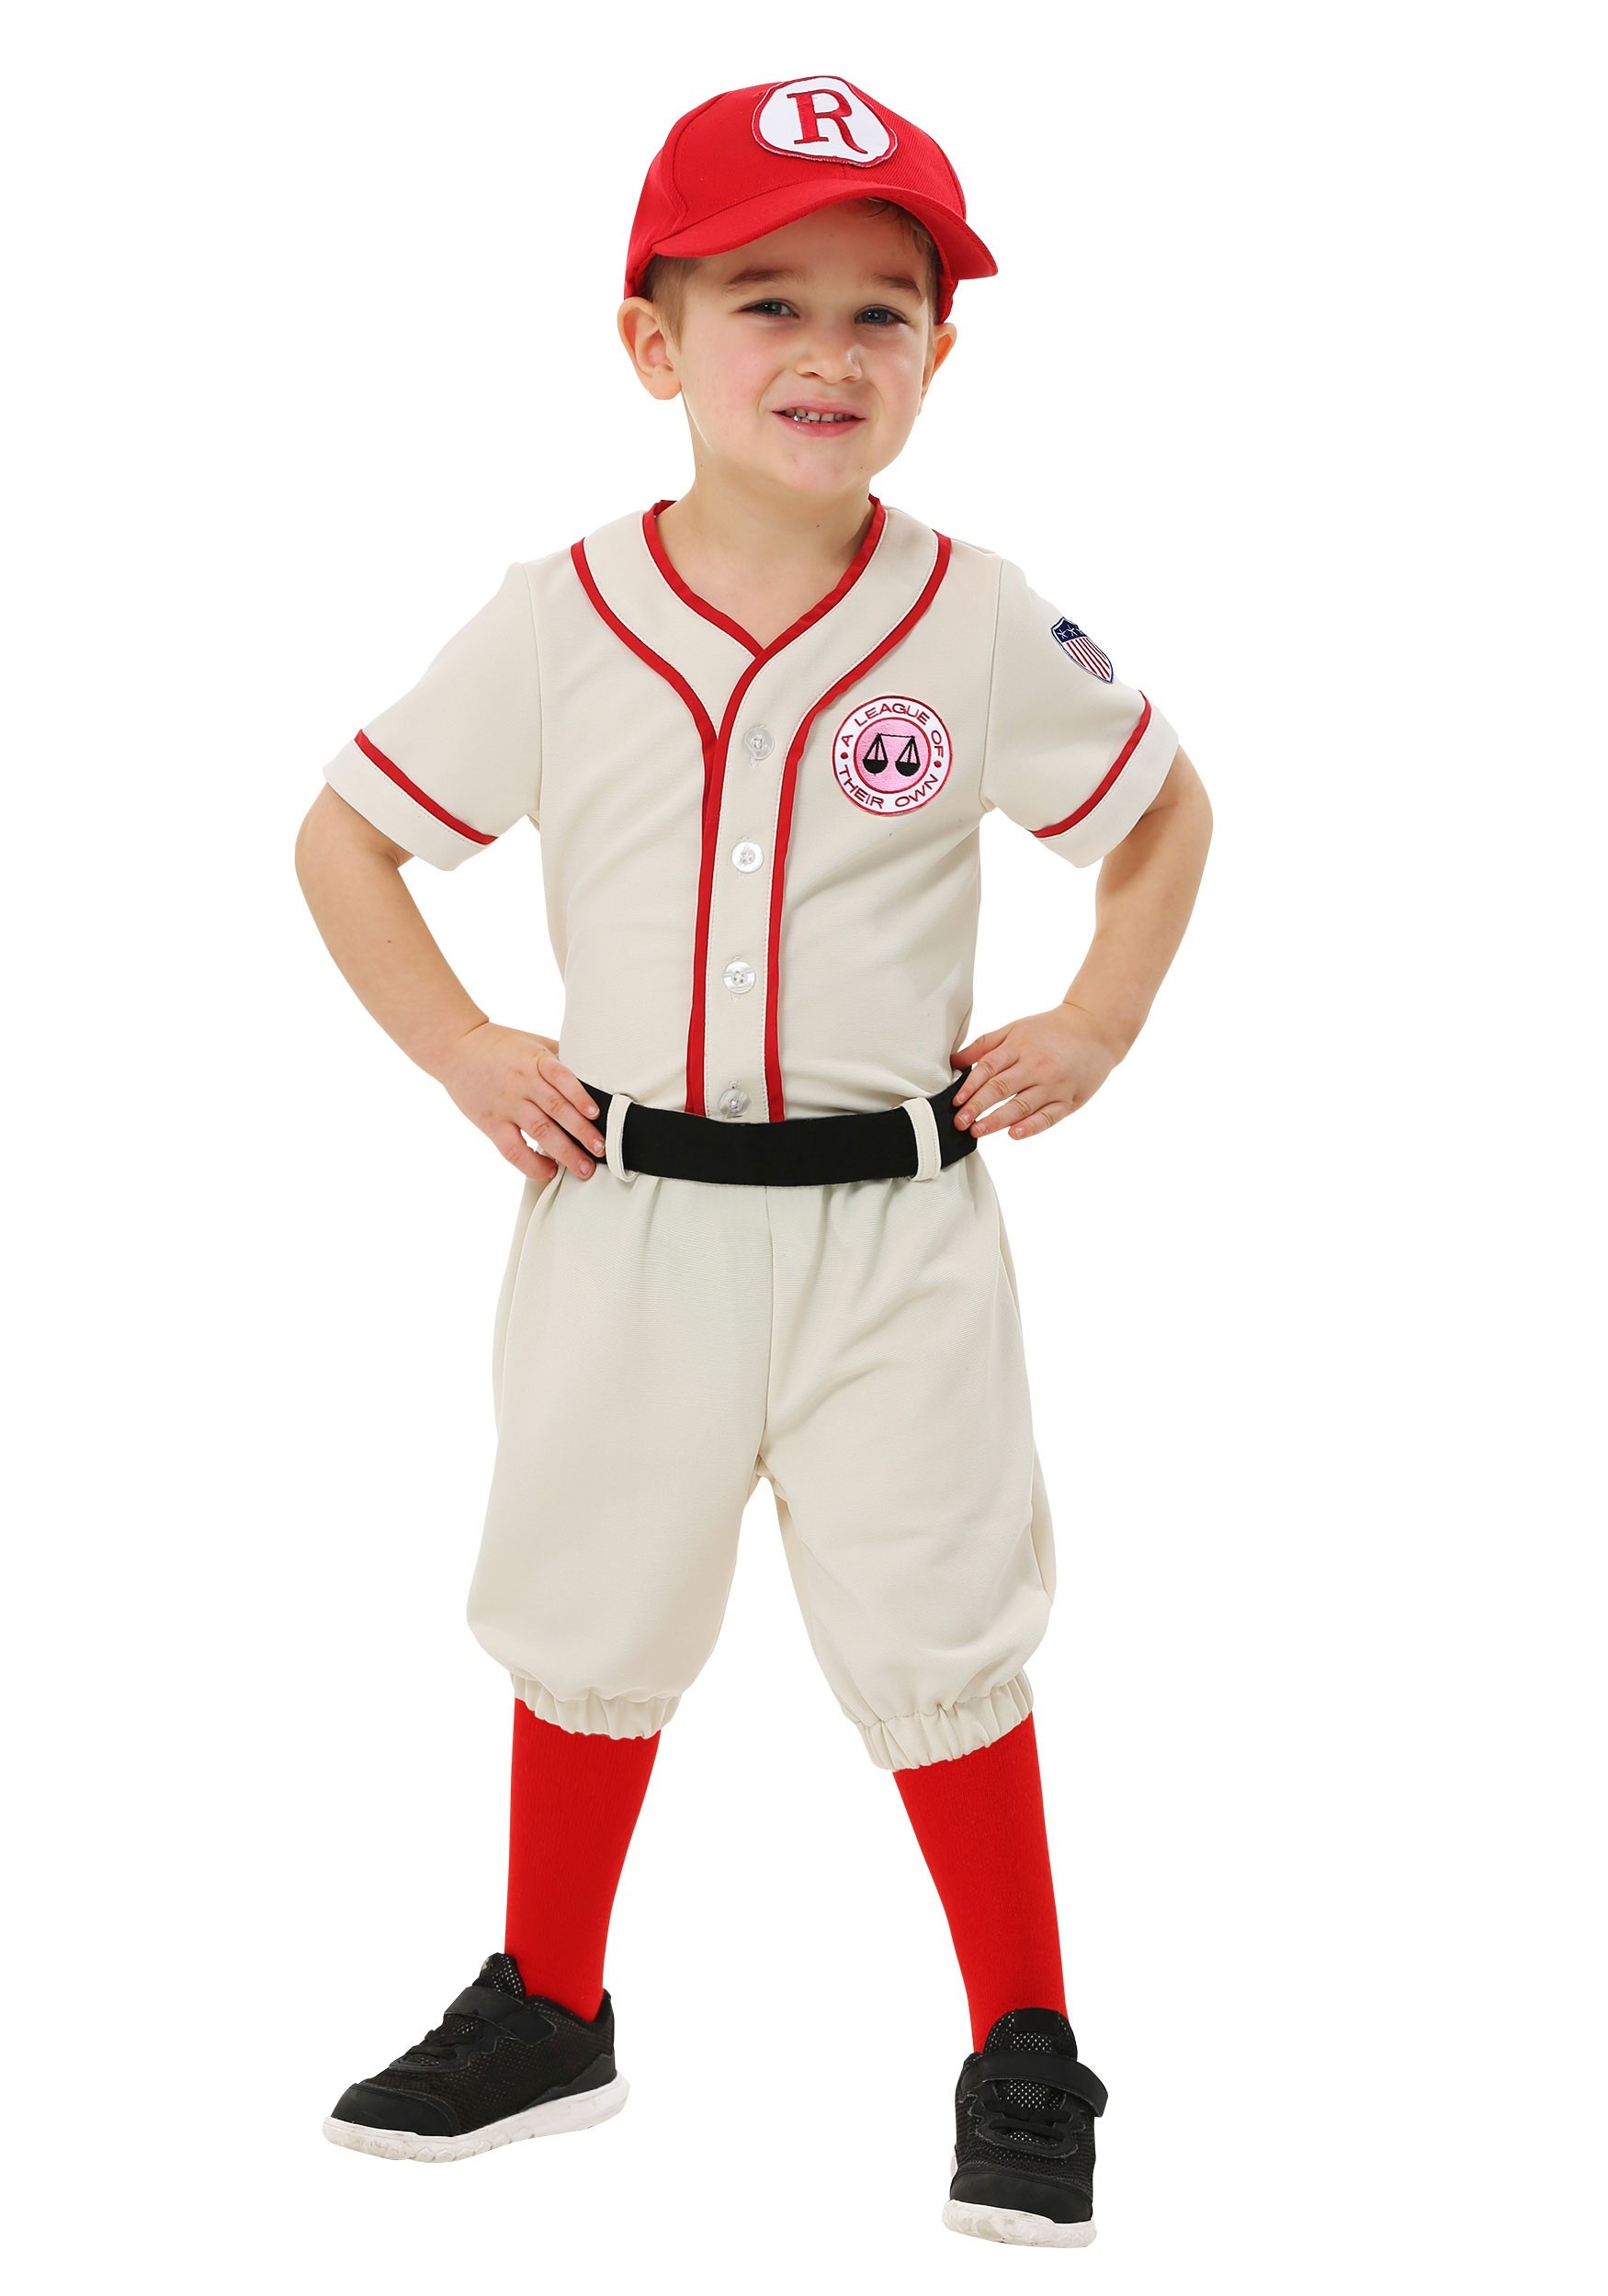 A League Of Their Own Toddler Jimmy Costume - image 1 of 3